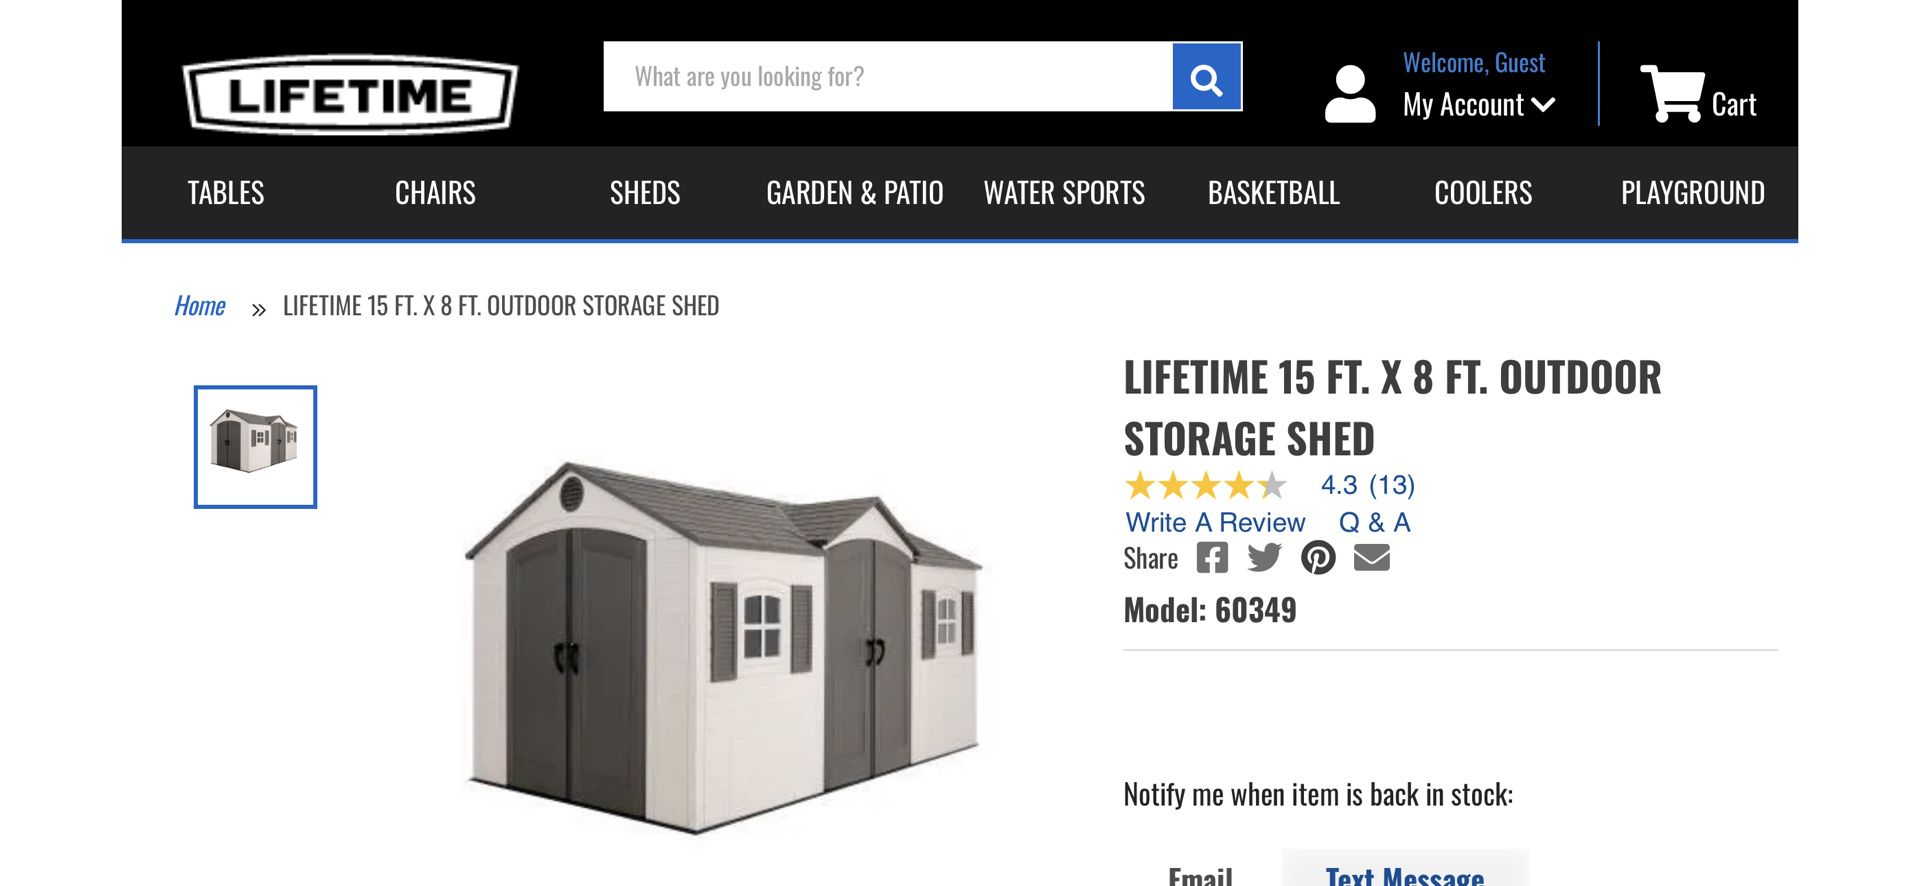 15’ X 8’ Lifetime Outdoor Shed